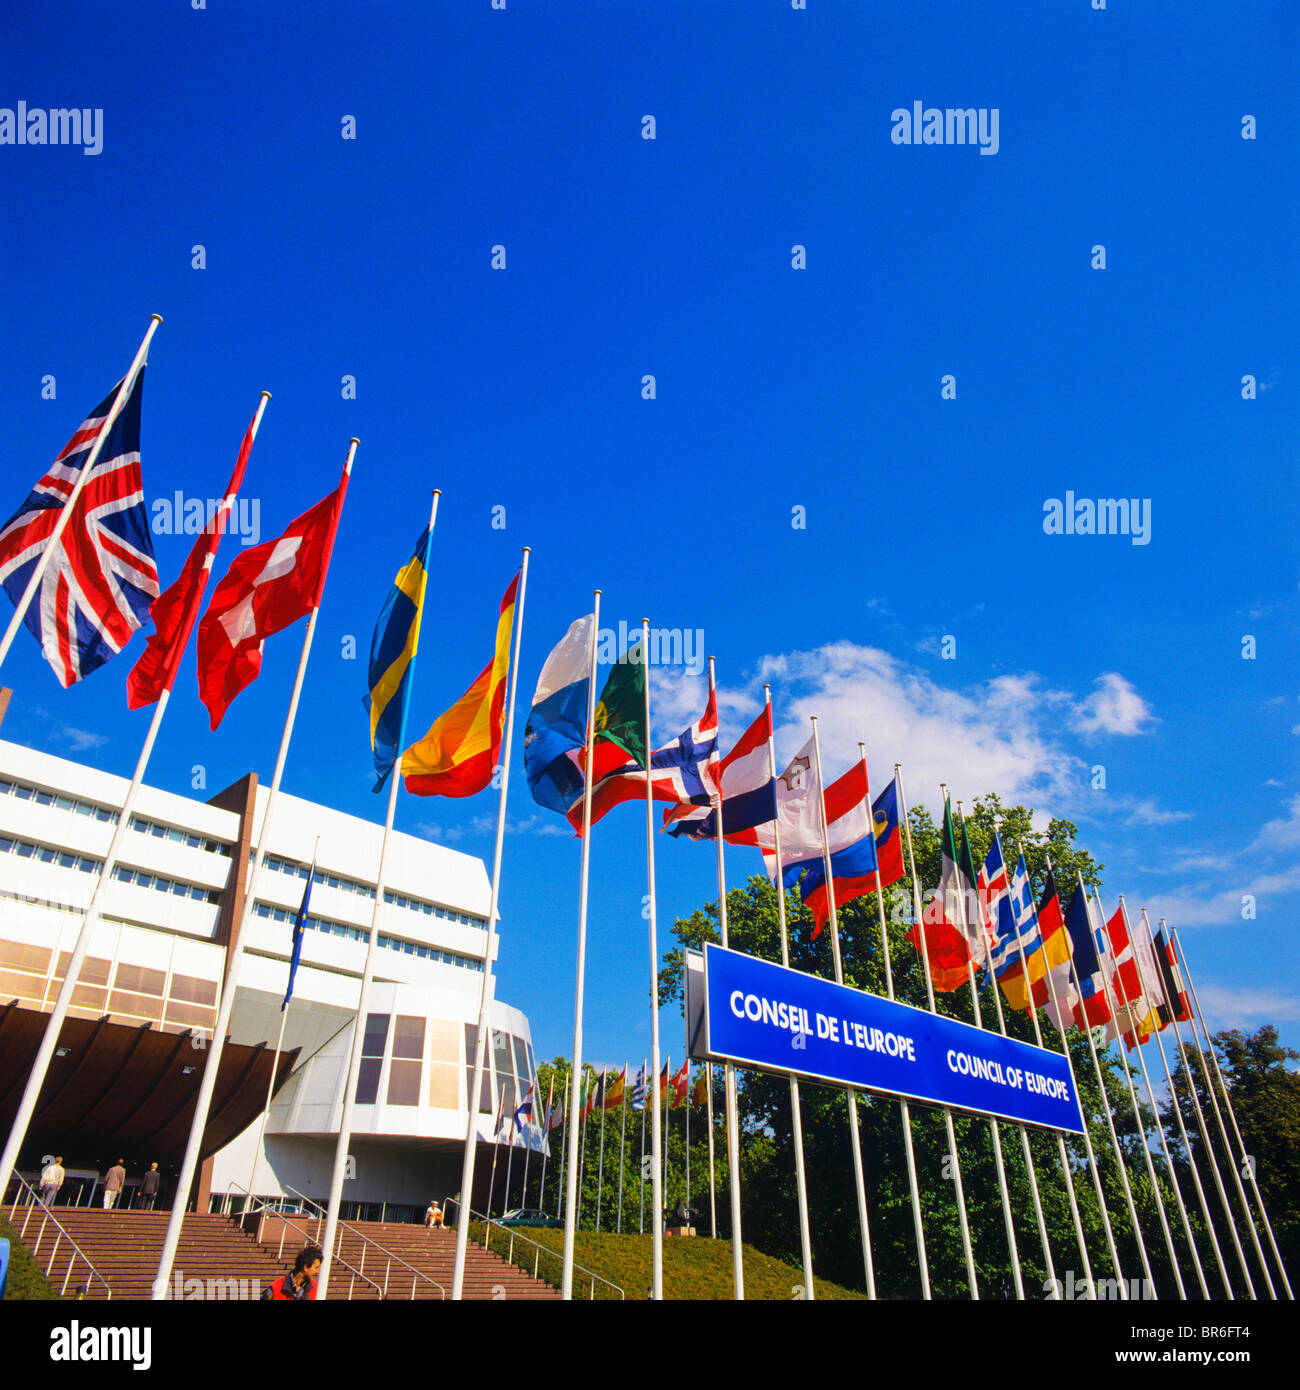 Flags of European countries in front of the Council of Europe building, Palais de l'Europe, Strasbourg, Alsace, France, Europe Stock Photo